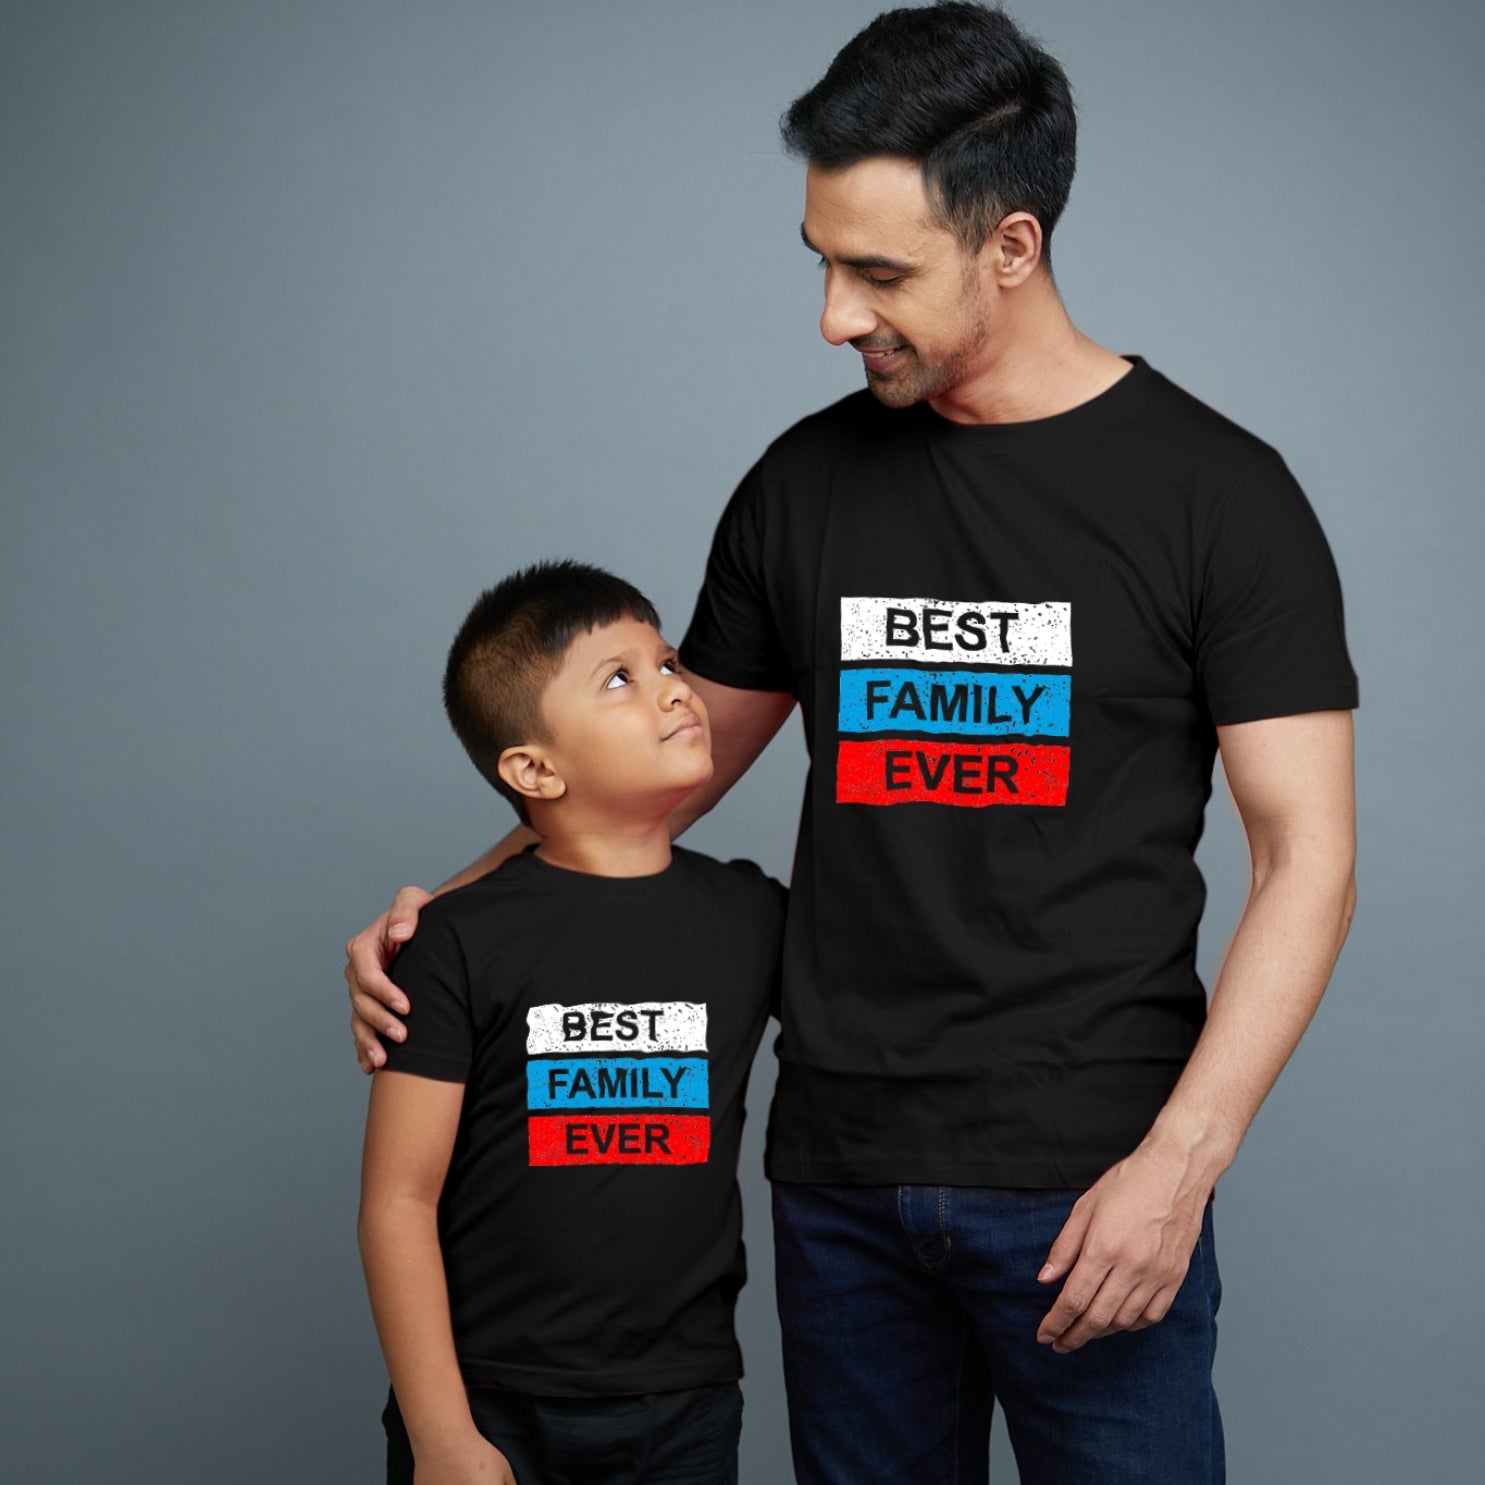 Family of 2 t shirt for Dad Son in Black Colour- Best Family Ever